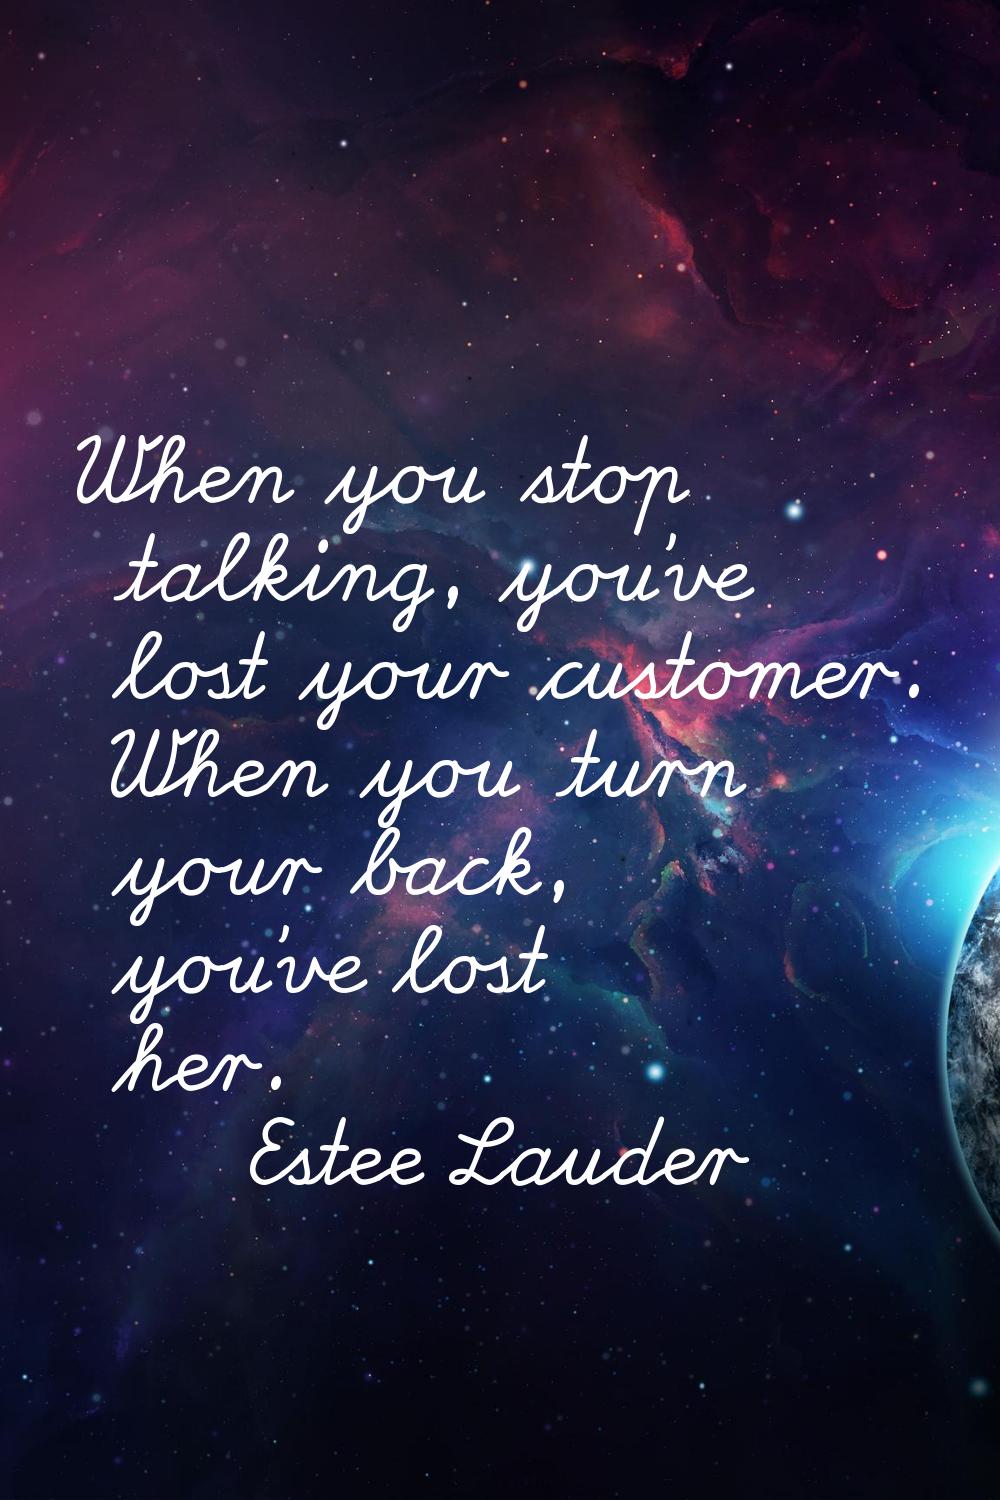 When you stop talking, you've lost your customer. When you turn your back, you've lost her.